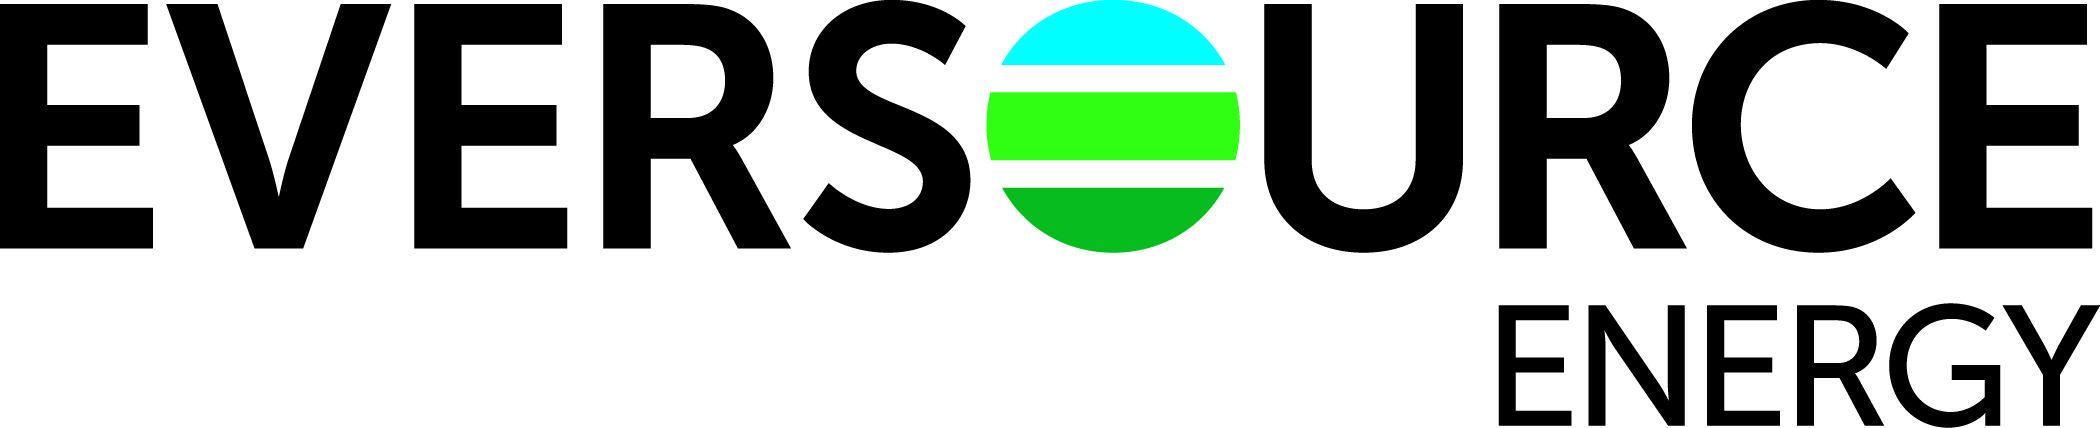 Eversource Logo - Eversource Logo - MSPCC